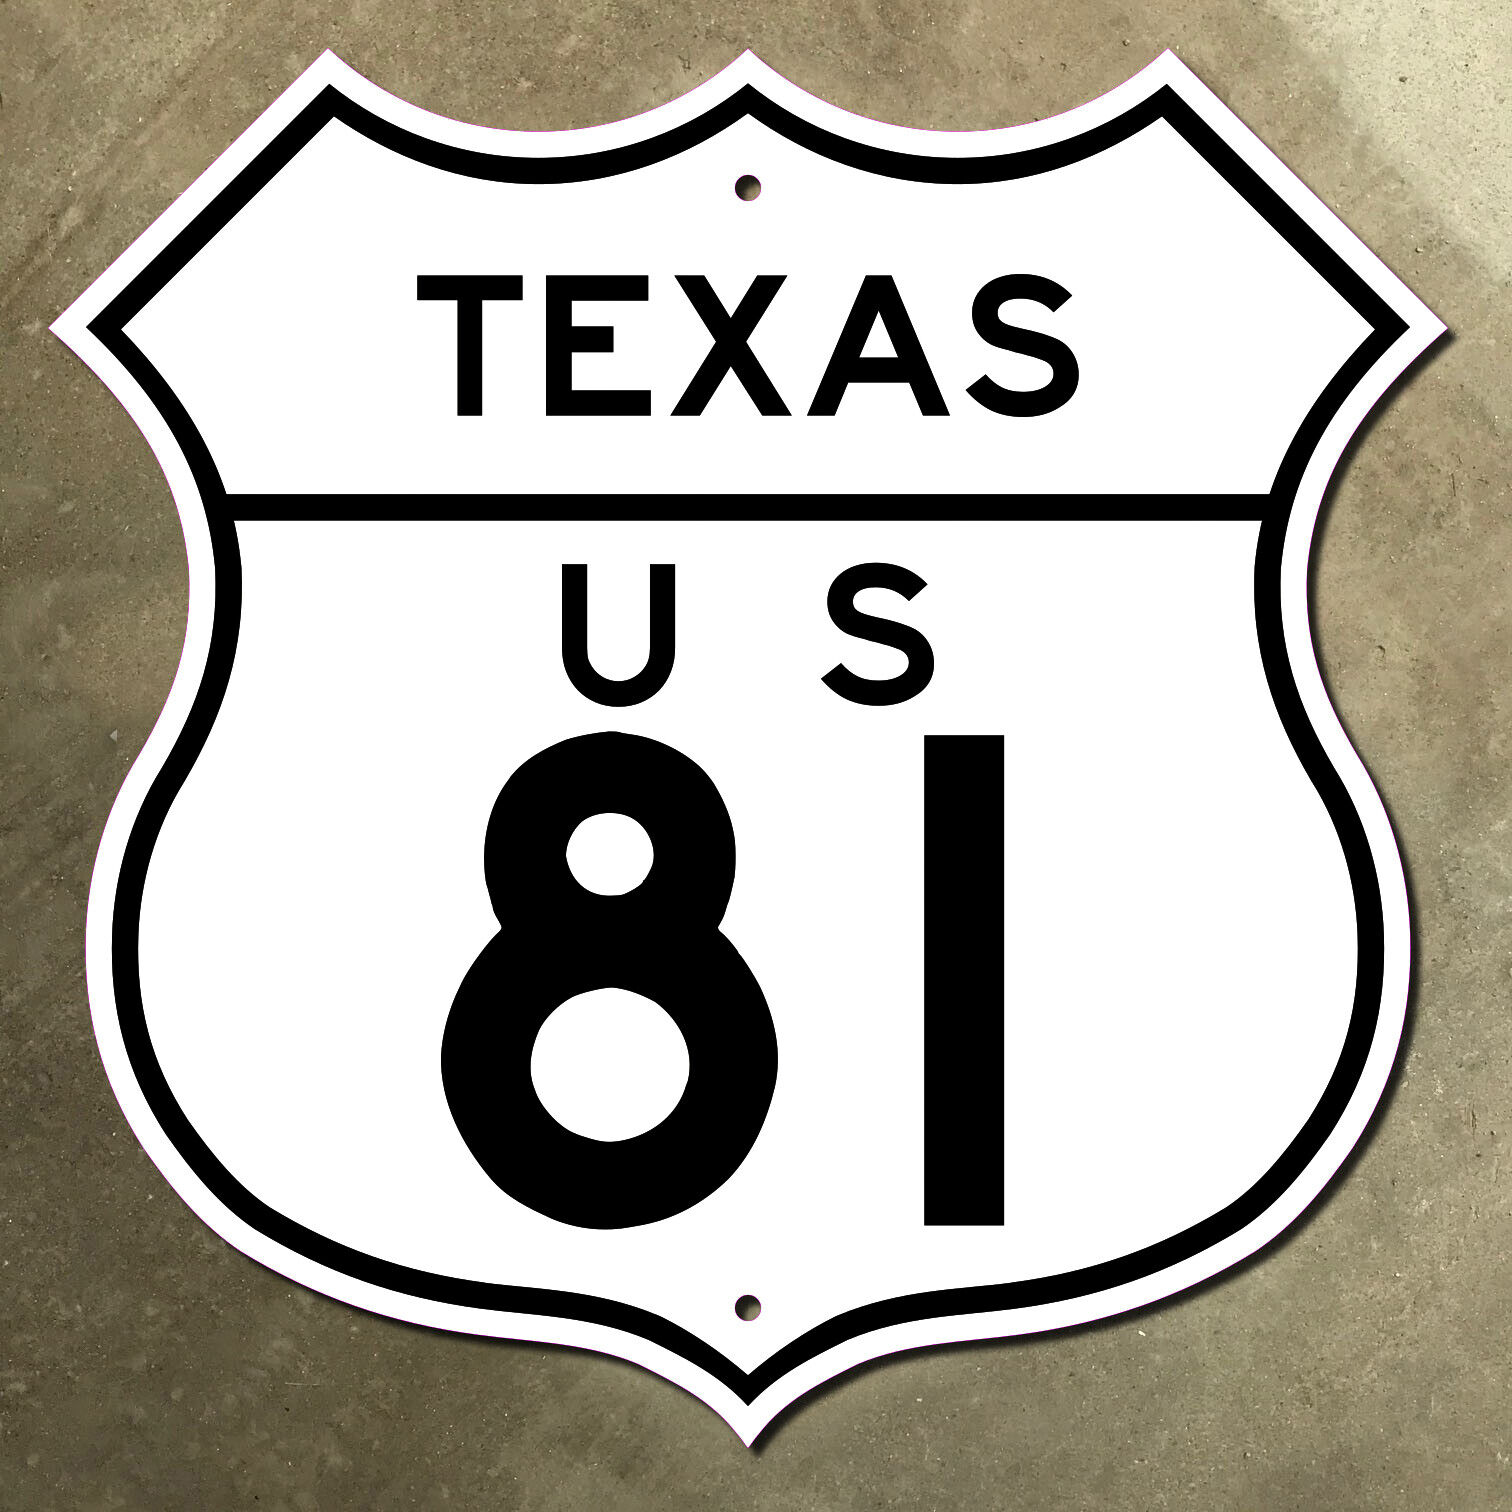 Texas US highway 81 route shield Fort Worth Austin 1926 road sign 16x16